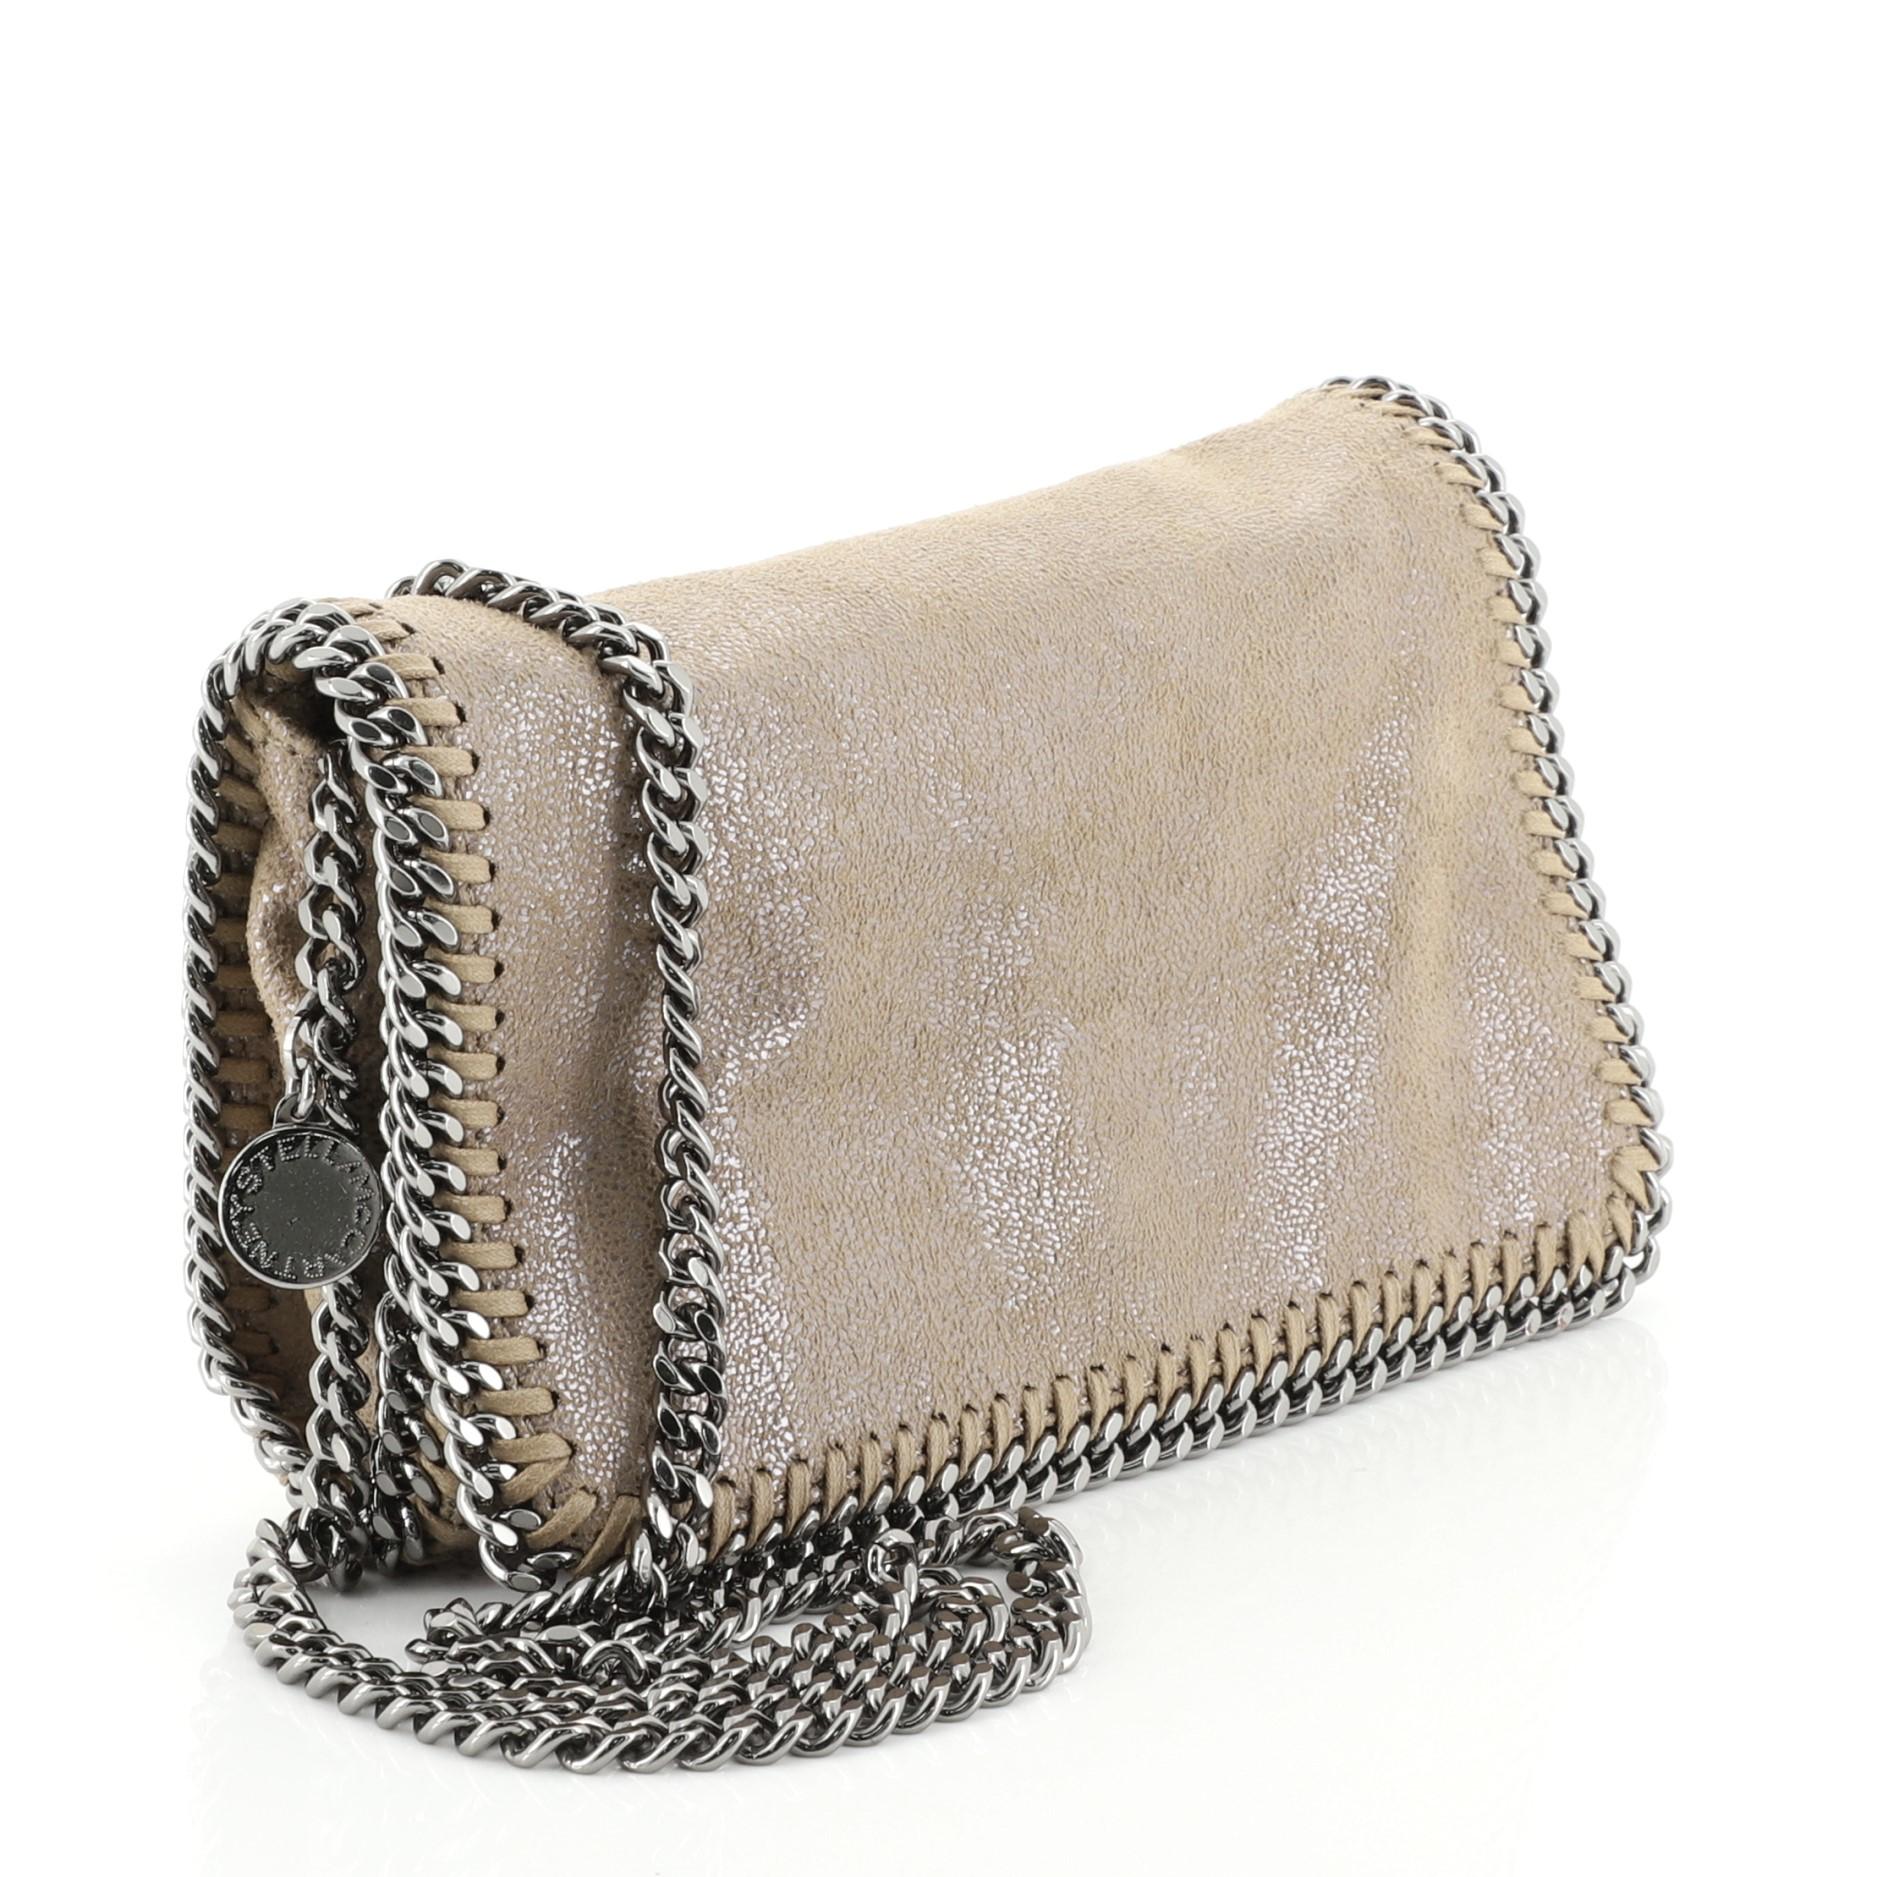 This Stella McCartney Falabella Flap Crossbody Bag Shaggy Deer Small, crafted from neutral shaggy deer, features chain link strap and trim, whipstitched edges, and gunmetal-tone hardware. Its flap with hidden magnetic snap closure opens to a pink